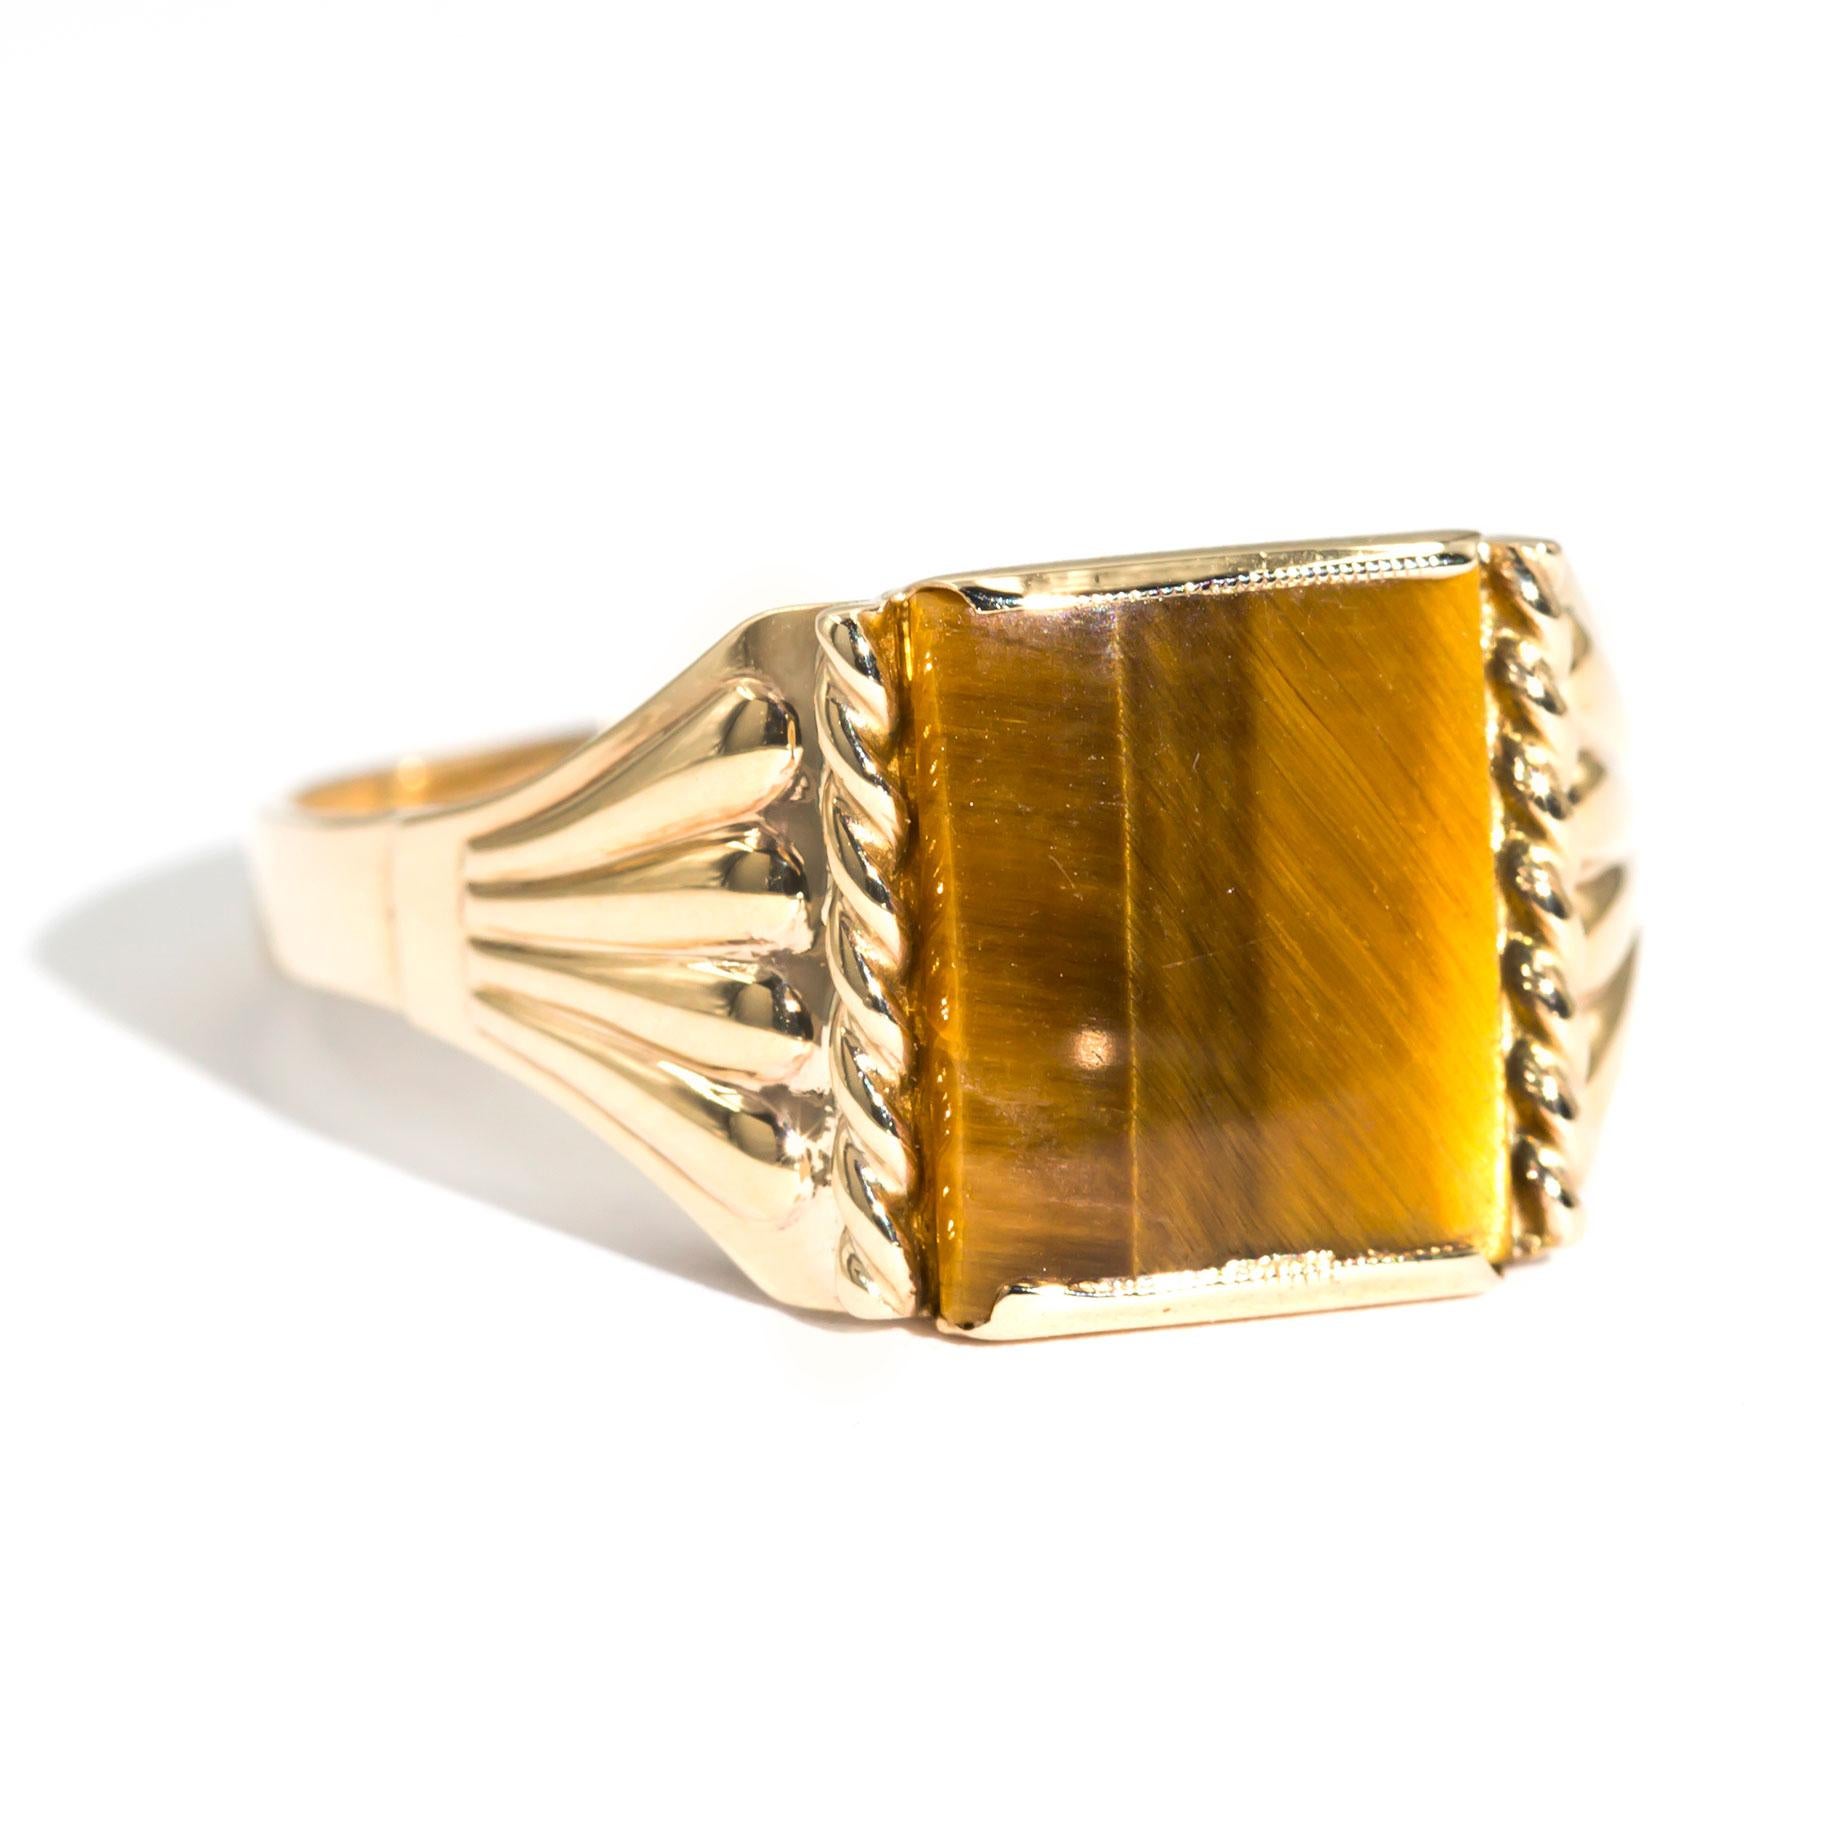 Crafted in 9 carat yellow gold is this handsome vintage mens signet ring featuring a charming 11.8x10 millimetre Tigers Eye seamlessly flowing down with pleated pattern sides. We have named this dapper vintage piece The Darcy Ring. The Darcy Ring